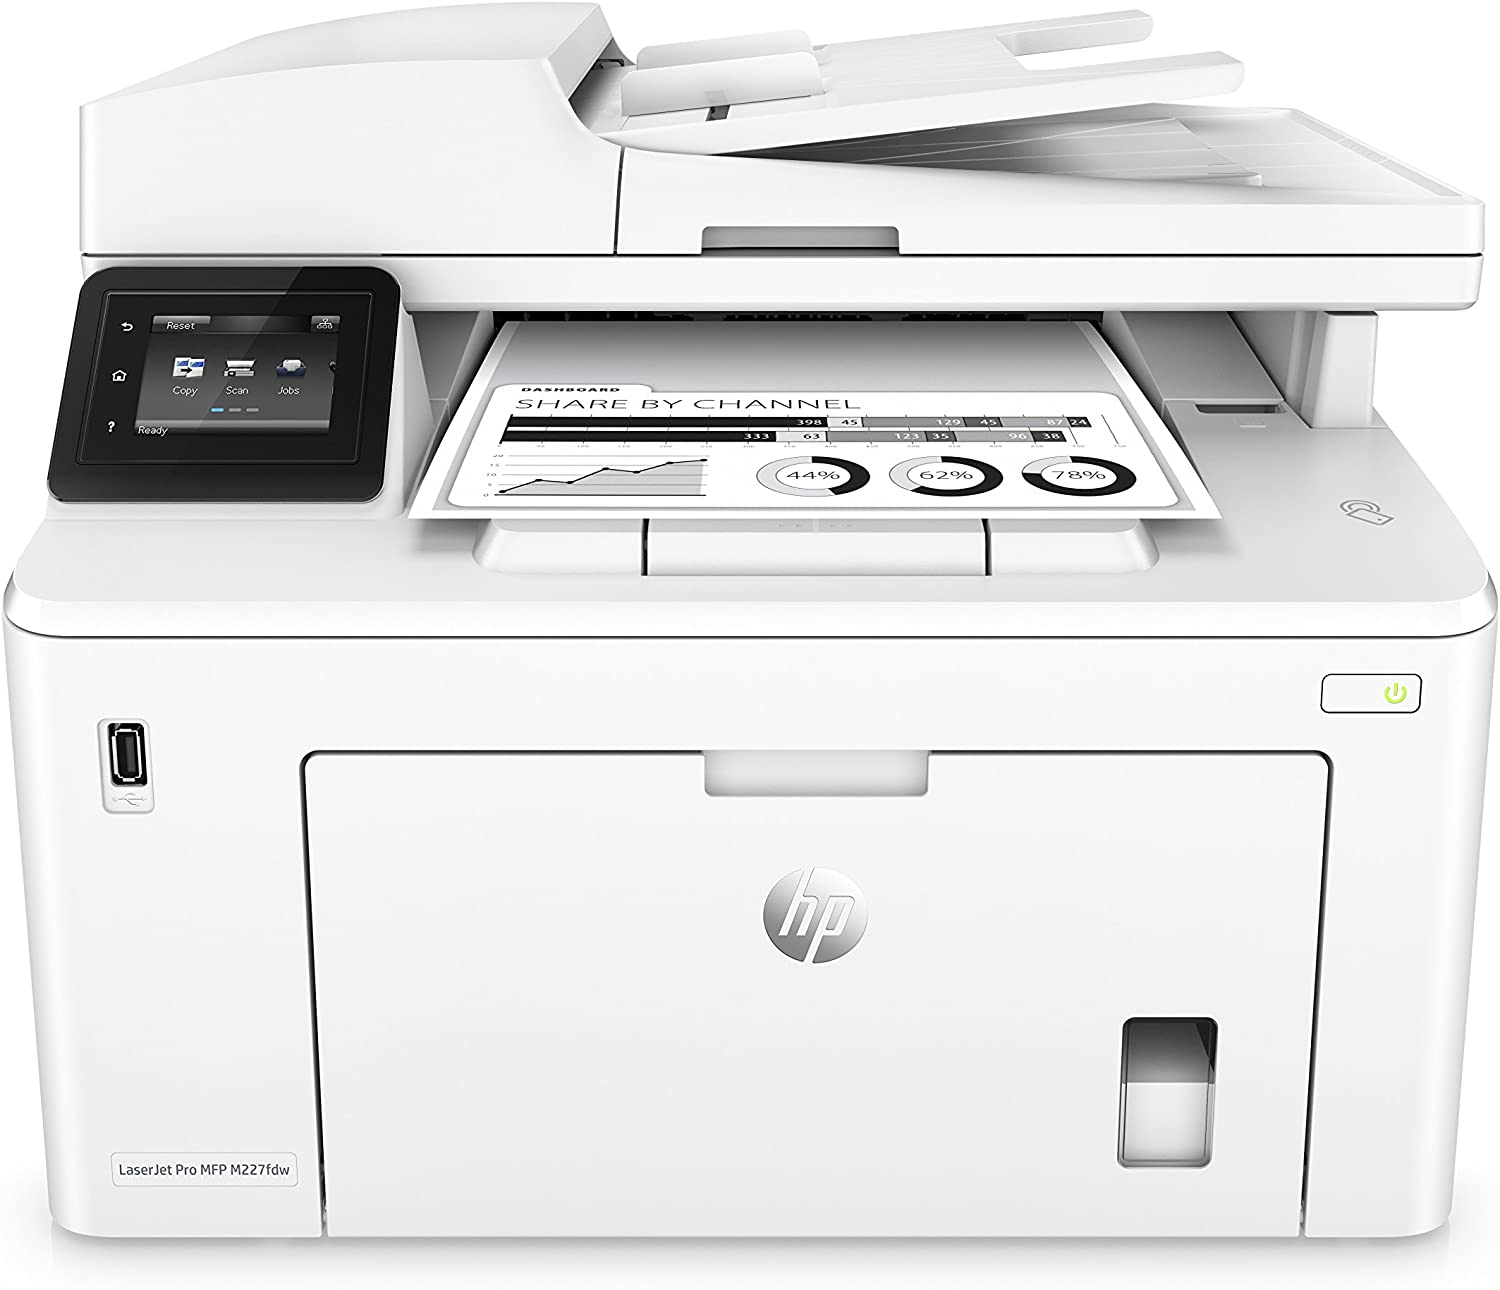 HP LaserJet Pro M227fdw Black-and-White All-in-One Wireless Laser Printer (G3Q75A) Print, Scan, Copy, Fax With DE USB Cable and File Folders - image 5 of 9